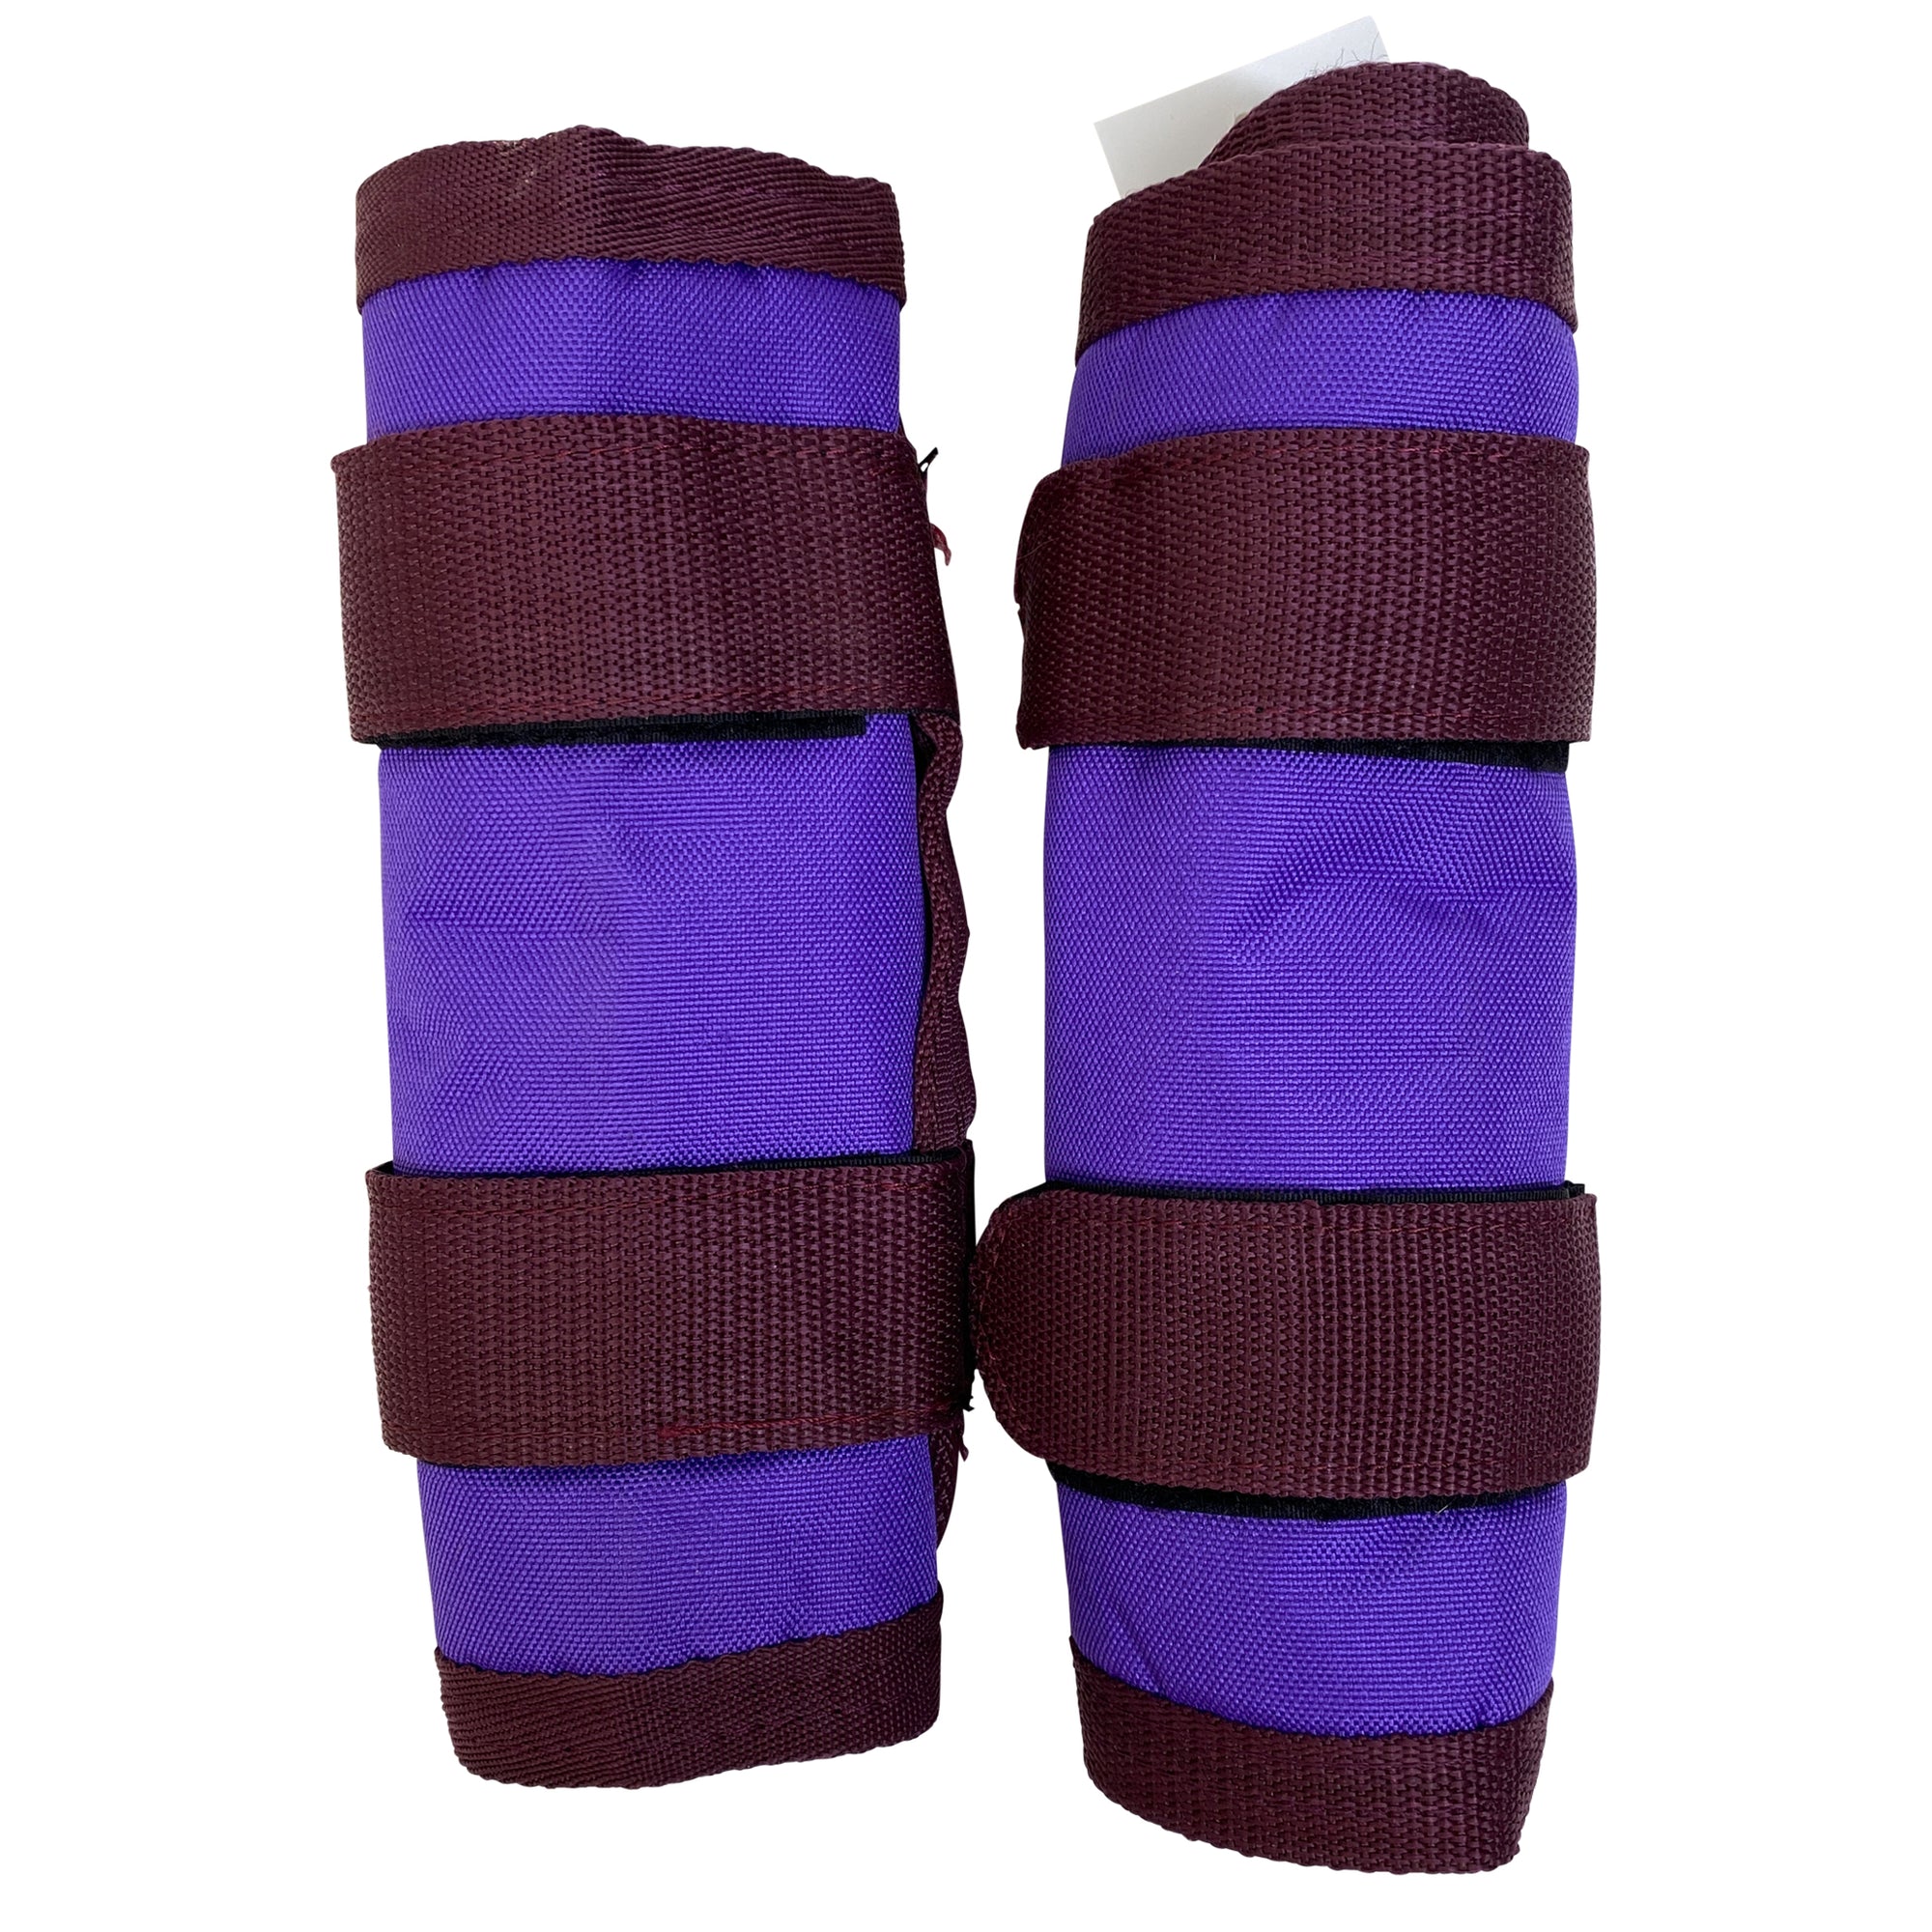 Tough1 Shipping Boots in Purple/Burgundy